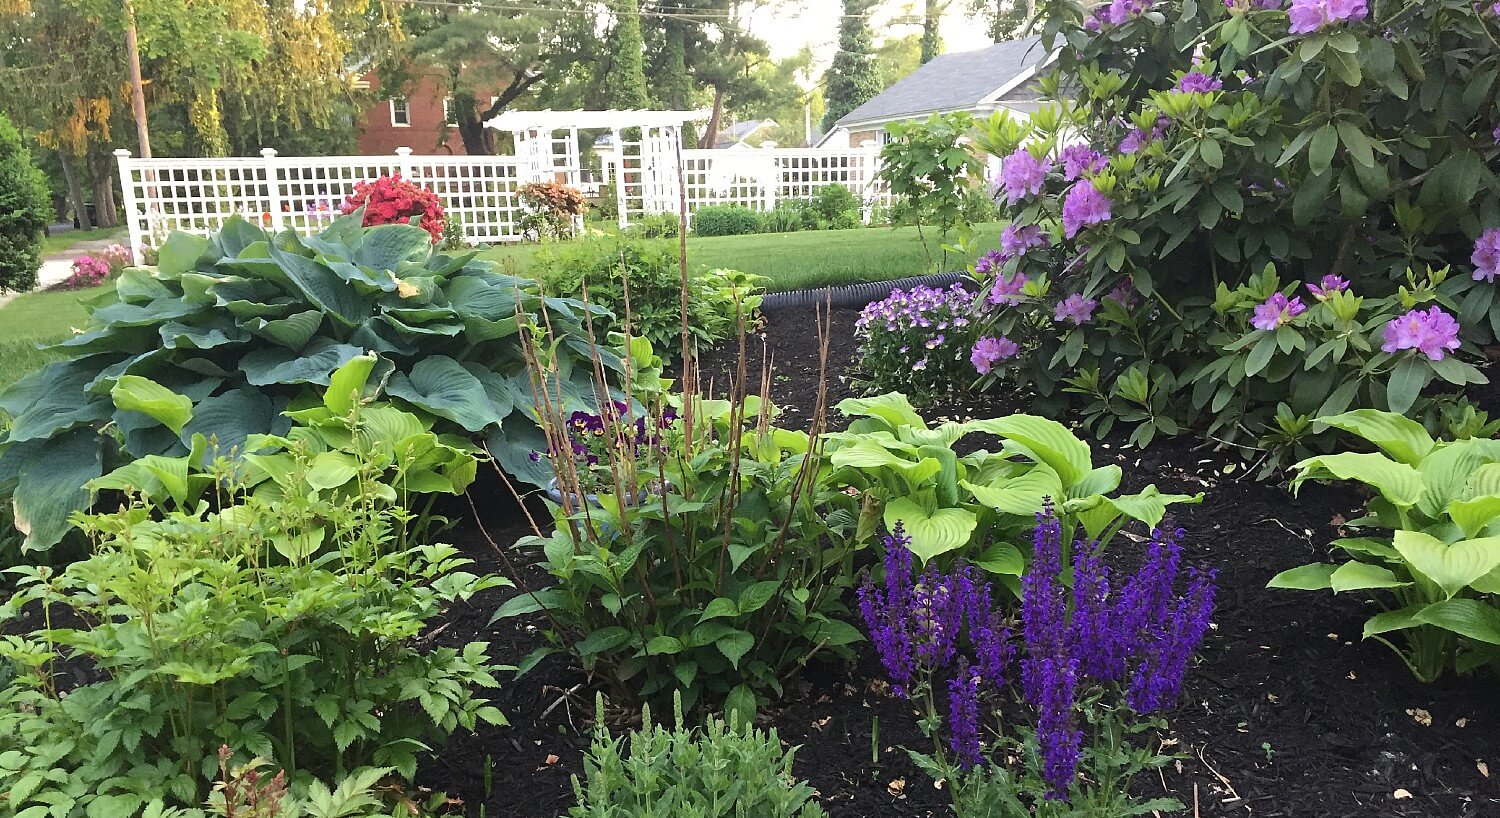 Garden bed full of lush green plants and purple and red flowers with lawn and white fence in background